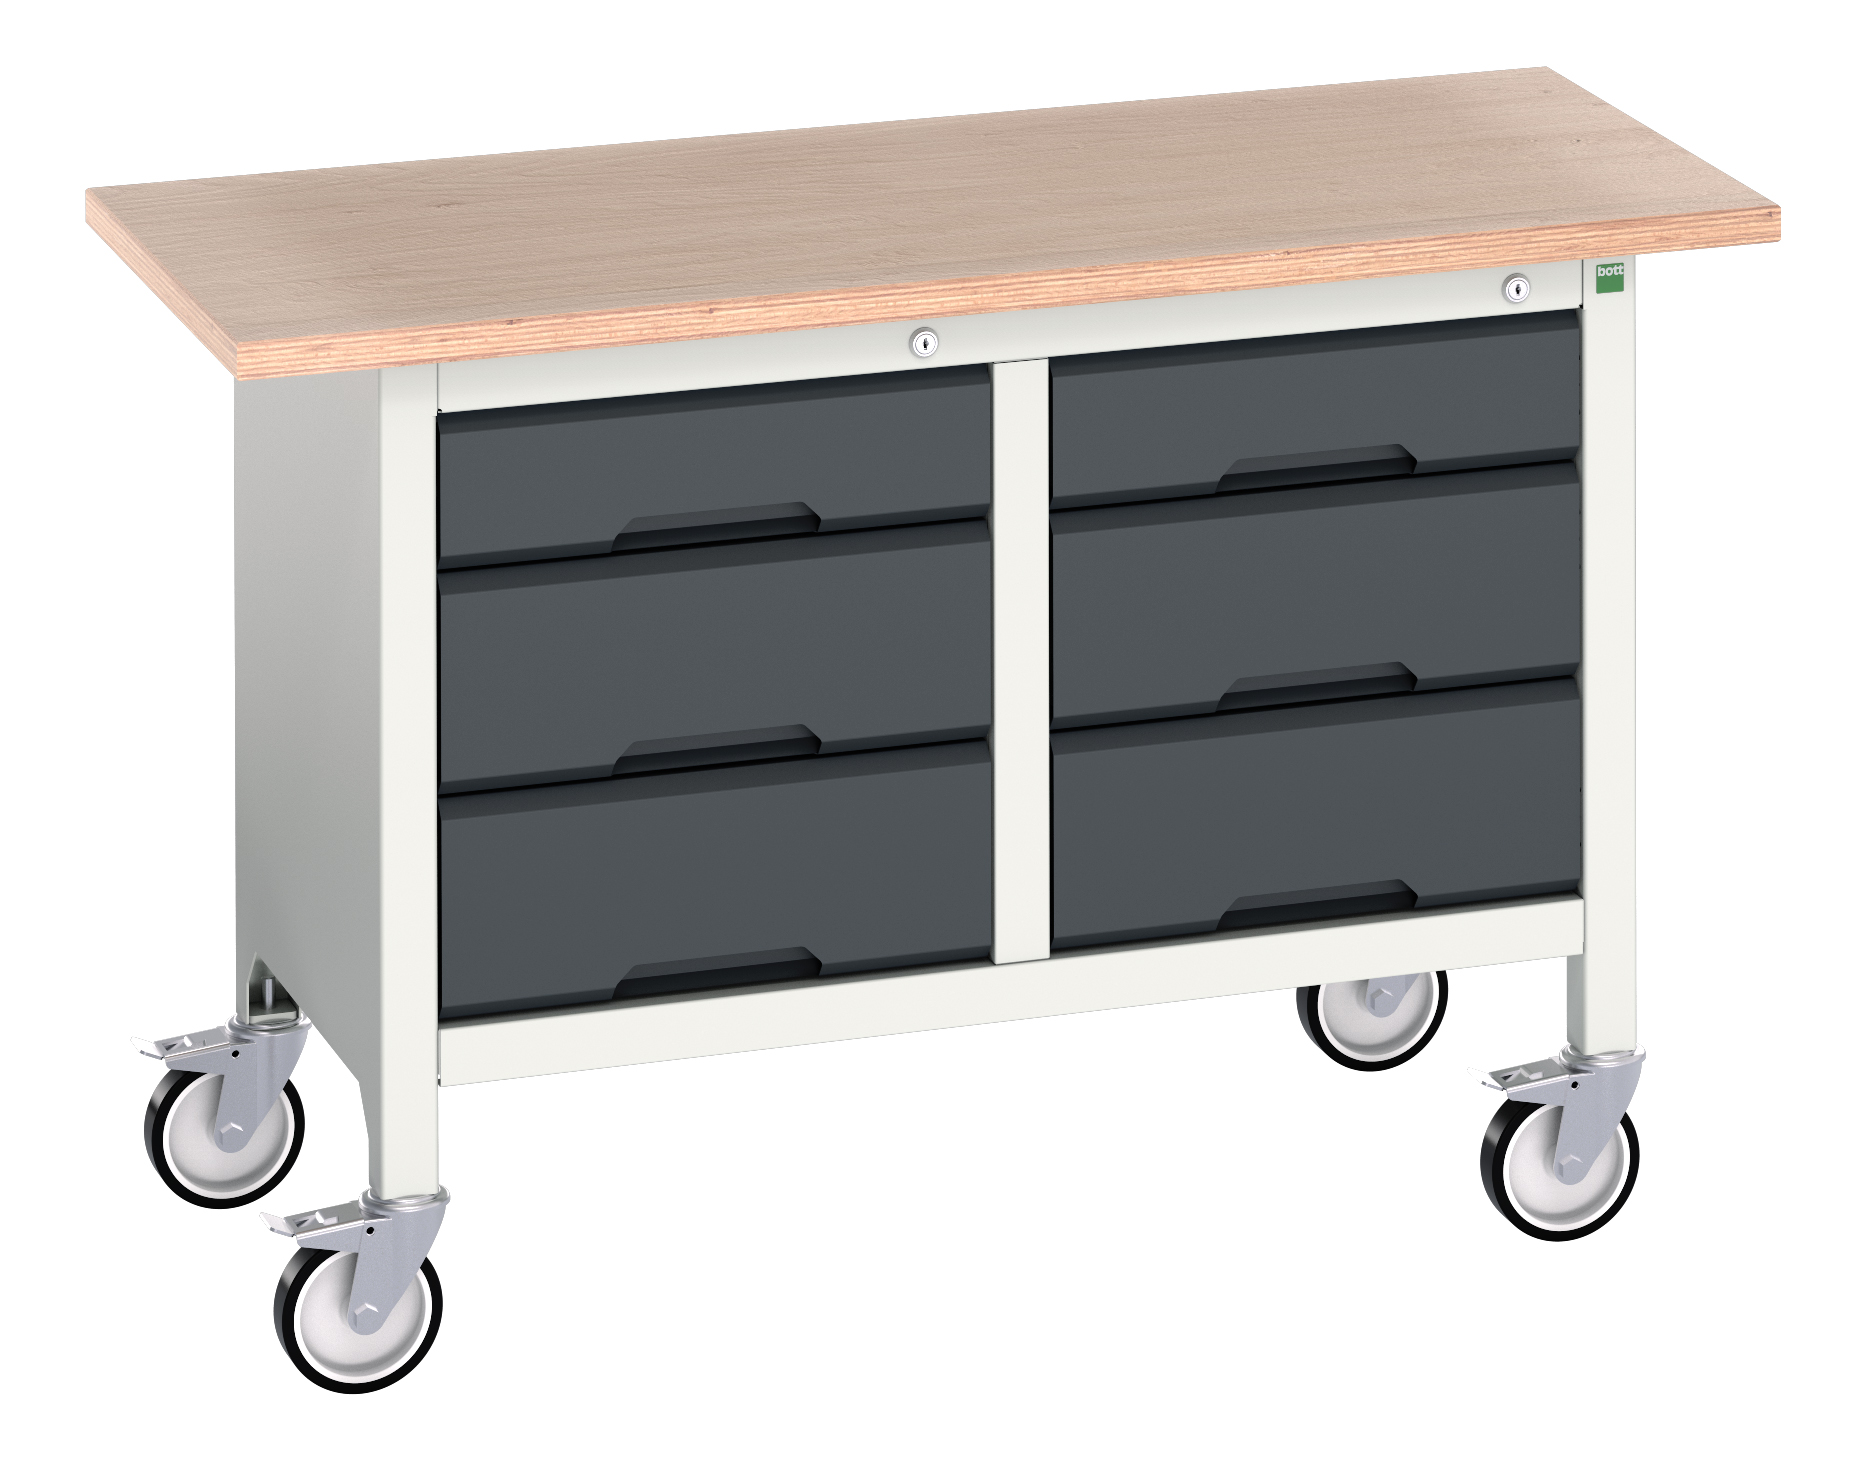 Bott Verso Mobile Storage Bench With 3 Drawer Cabinet / 3 Drawer Cabinet - 16923204.19